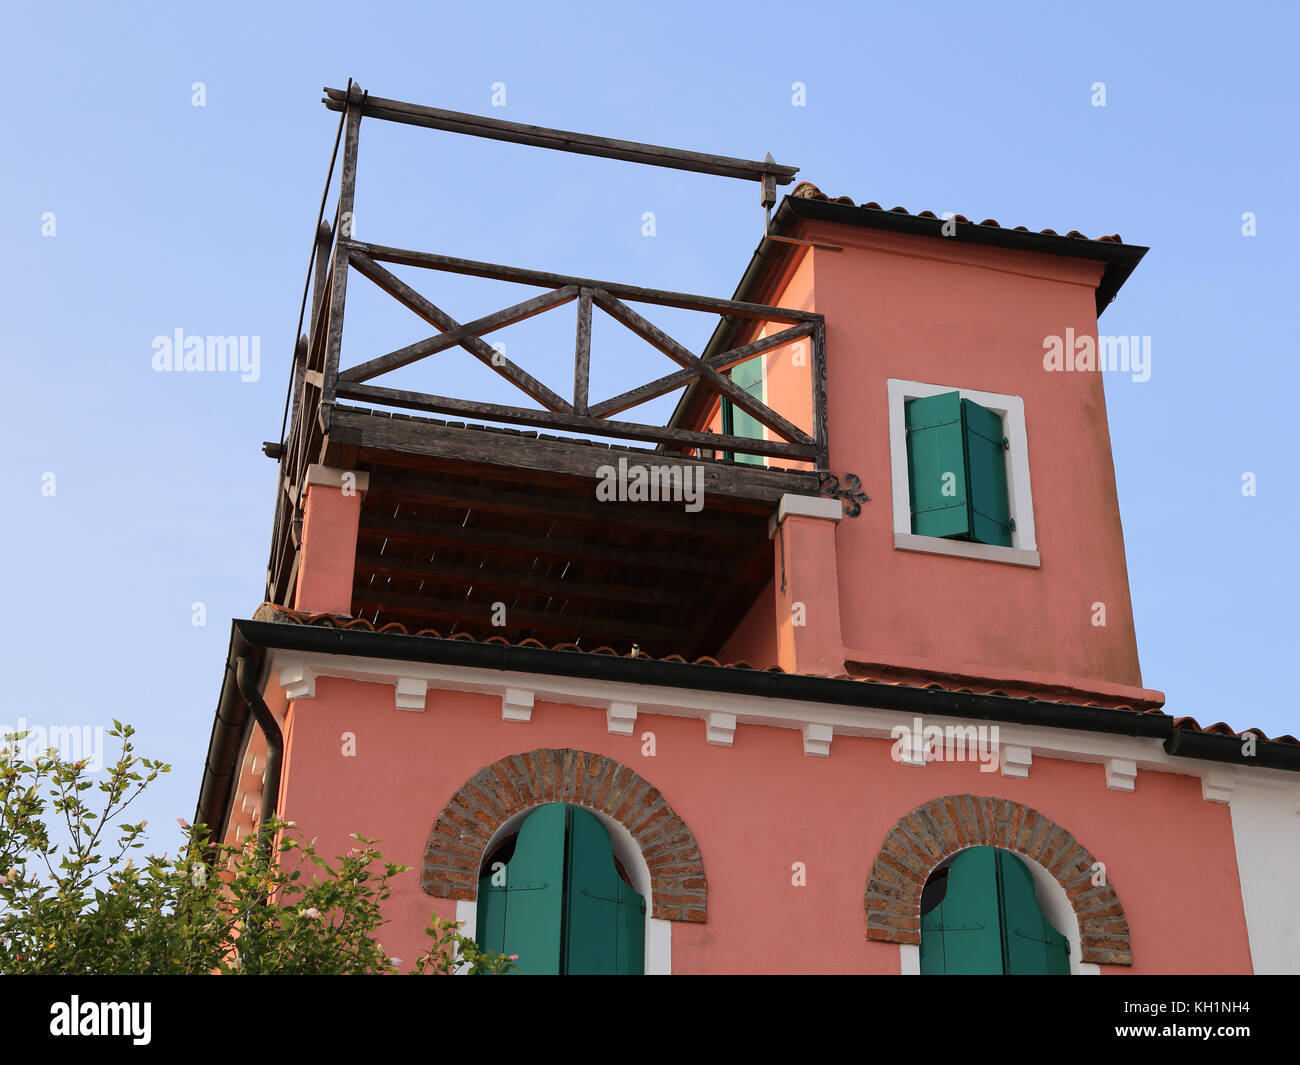 Detail of house with a roof terrace called Altana in Italian language Stock Photo